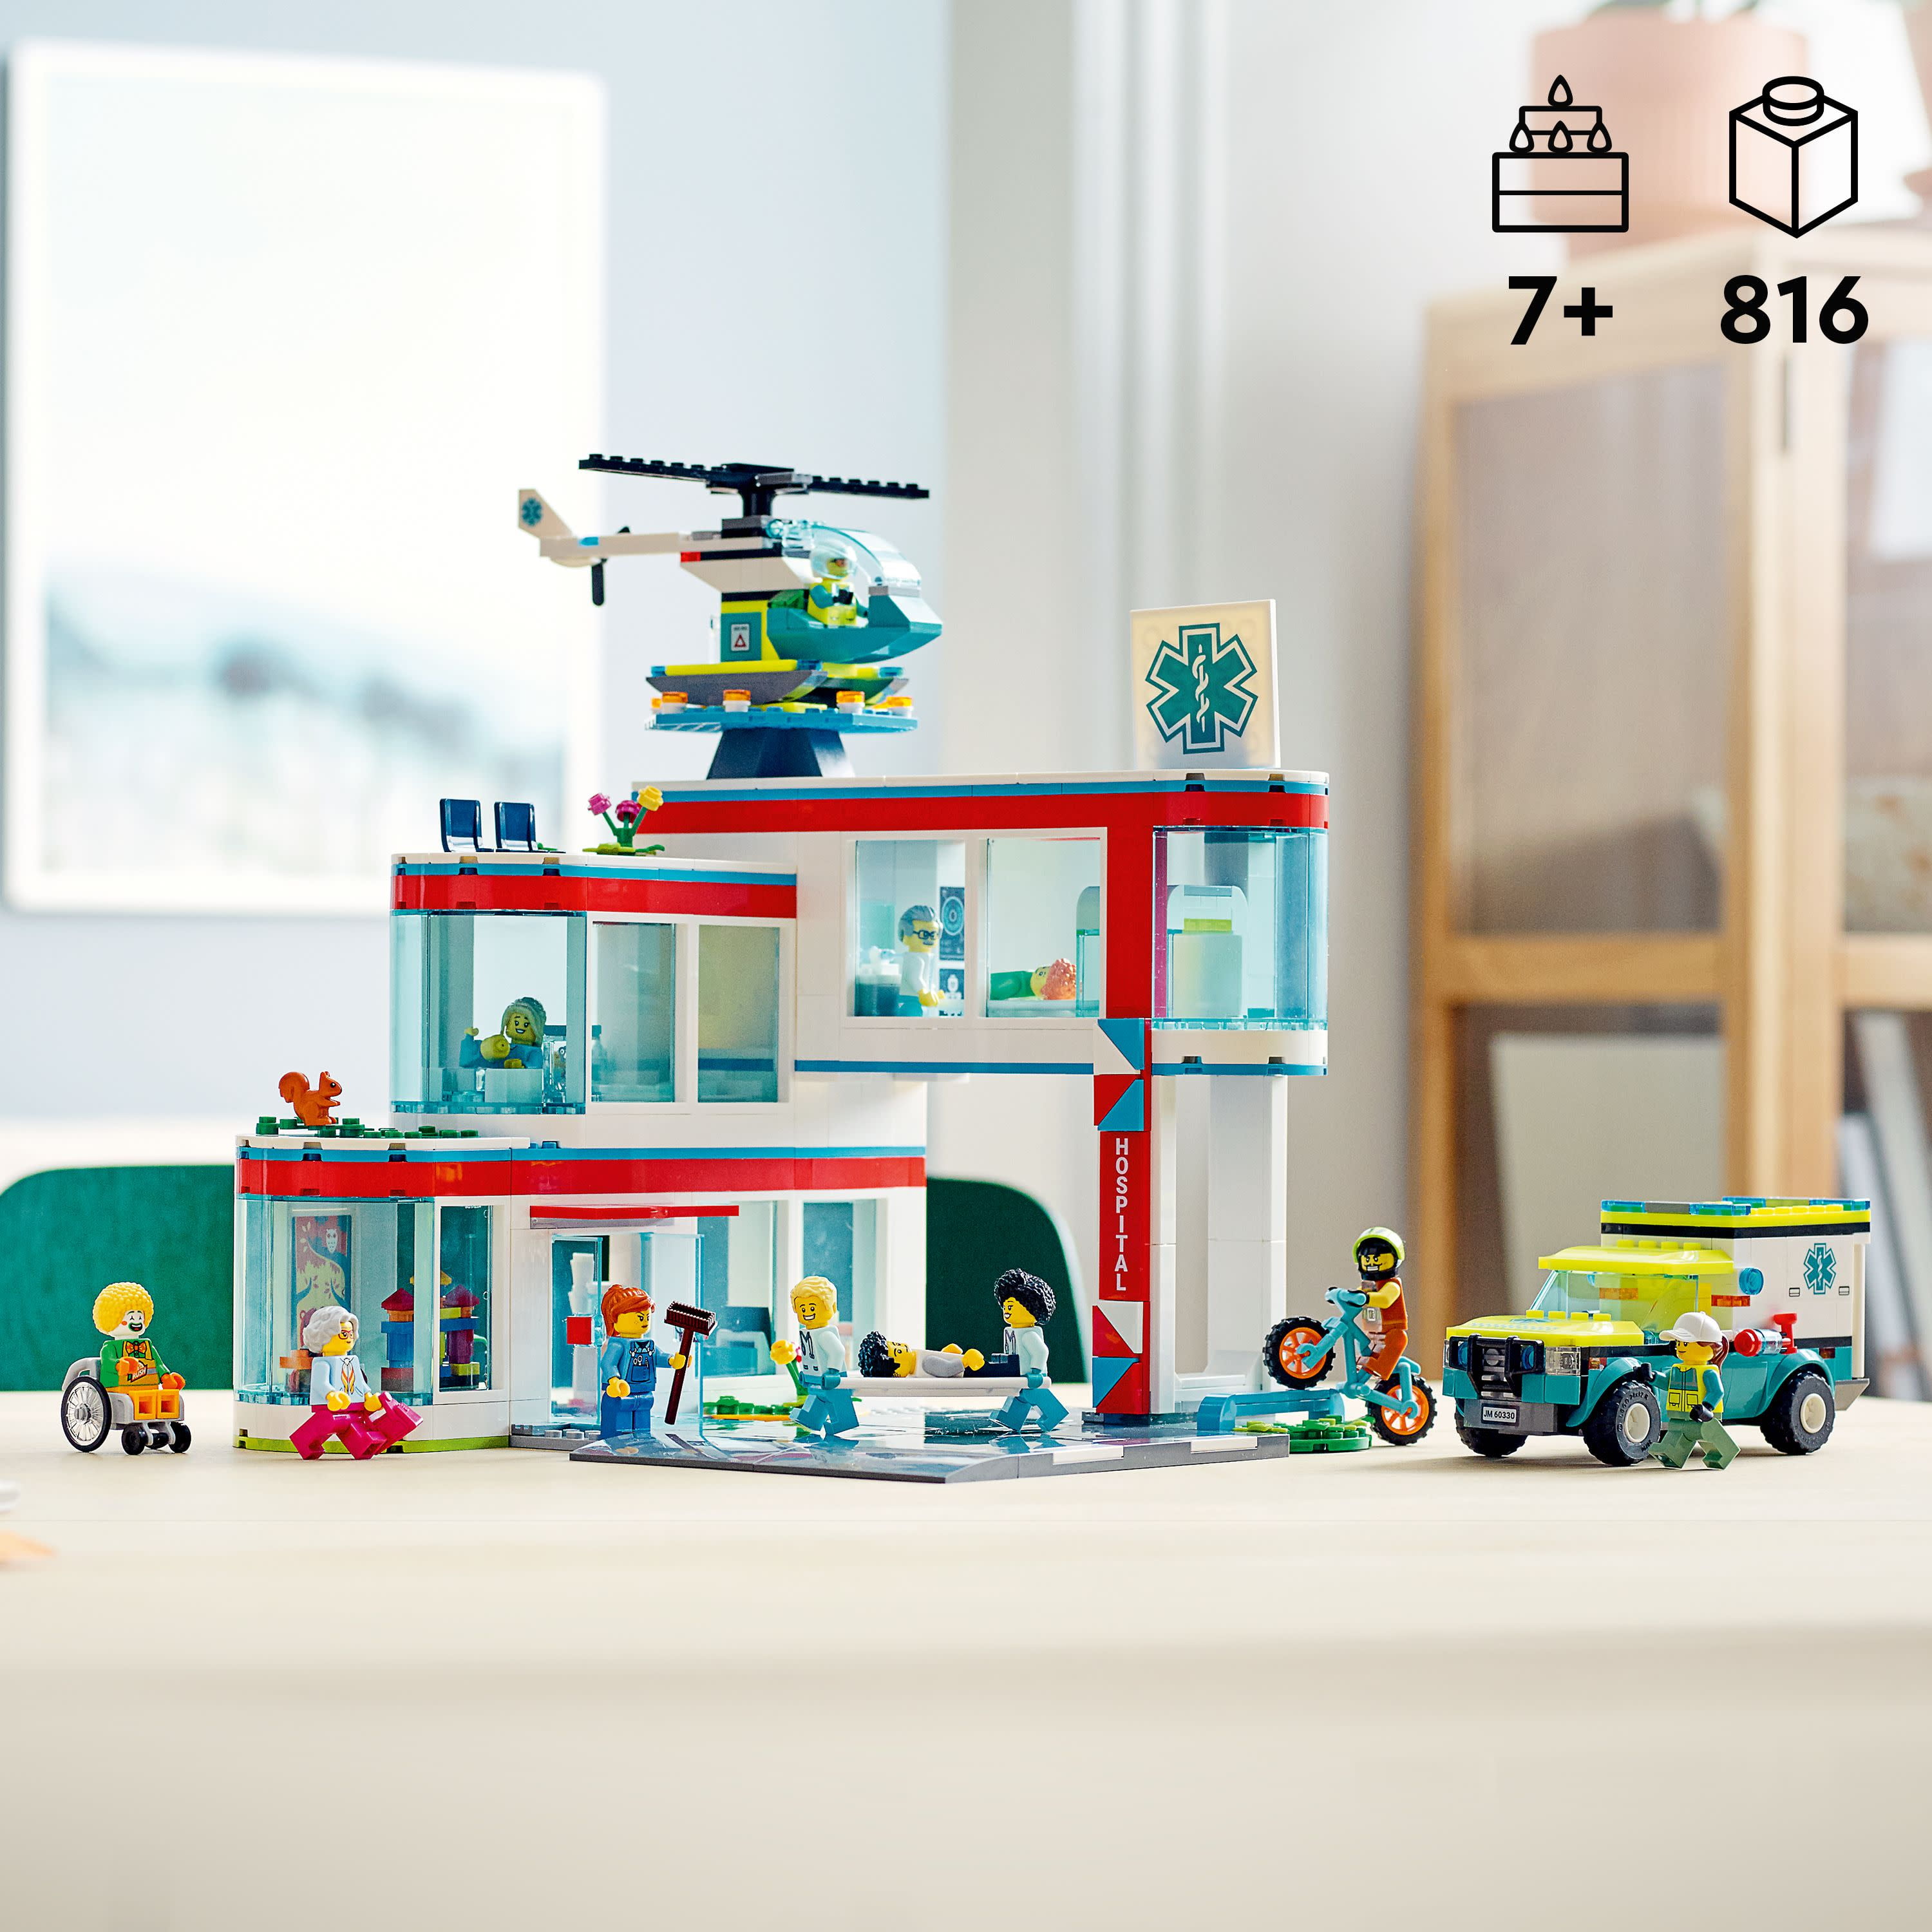 LEGO City Hospital Building with Toy Helicopter and 12 Mini Figures, Pretend Play Toy Hospital for Educational Fun, Connect to Other LEGO City Sets, for Kids Age 7+ - Walmart.com